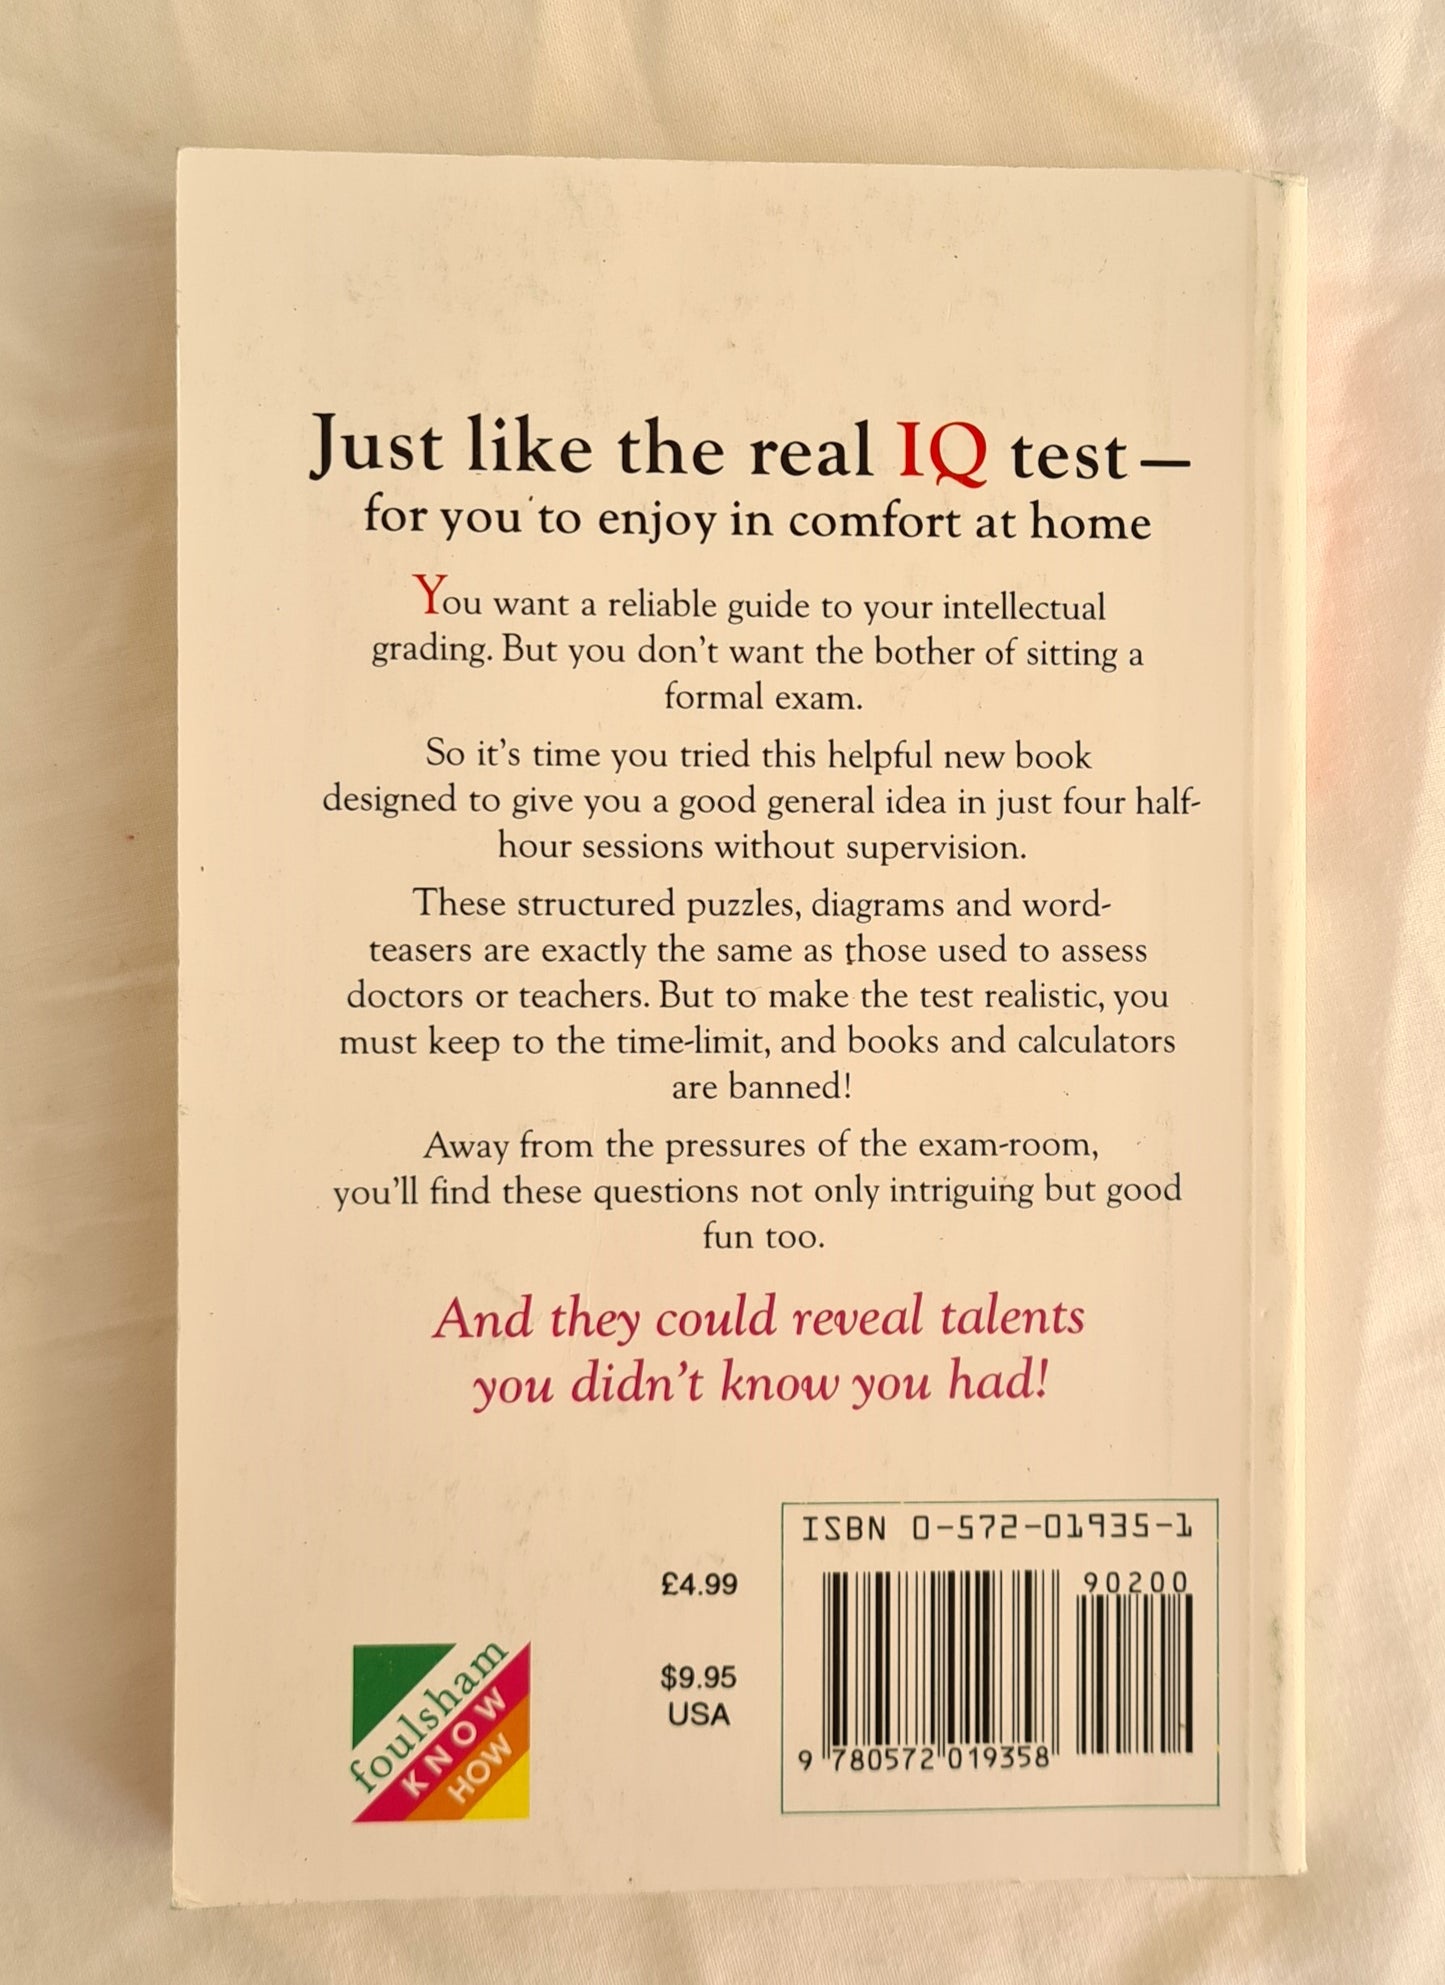 Measure Your IQ by Gilles Azzopardi